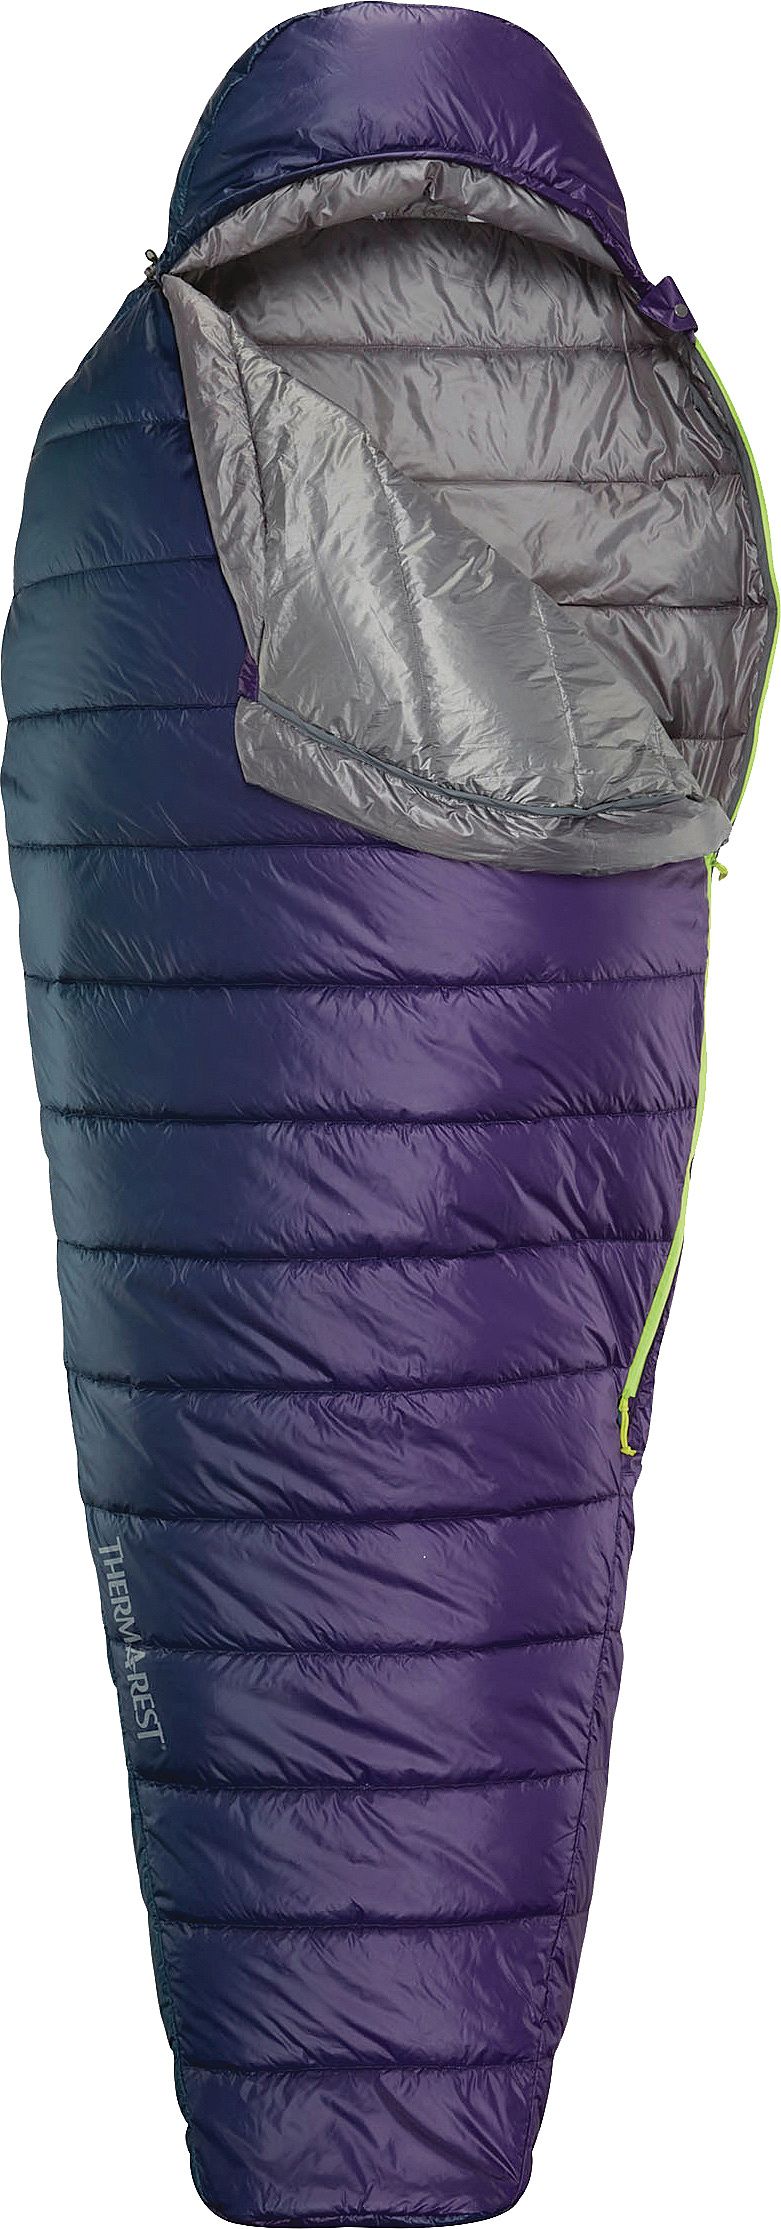 Load image into Gallery viewer, Thermarest Space Cowboy 45 degree Sleeping Bag
